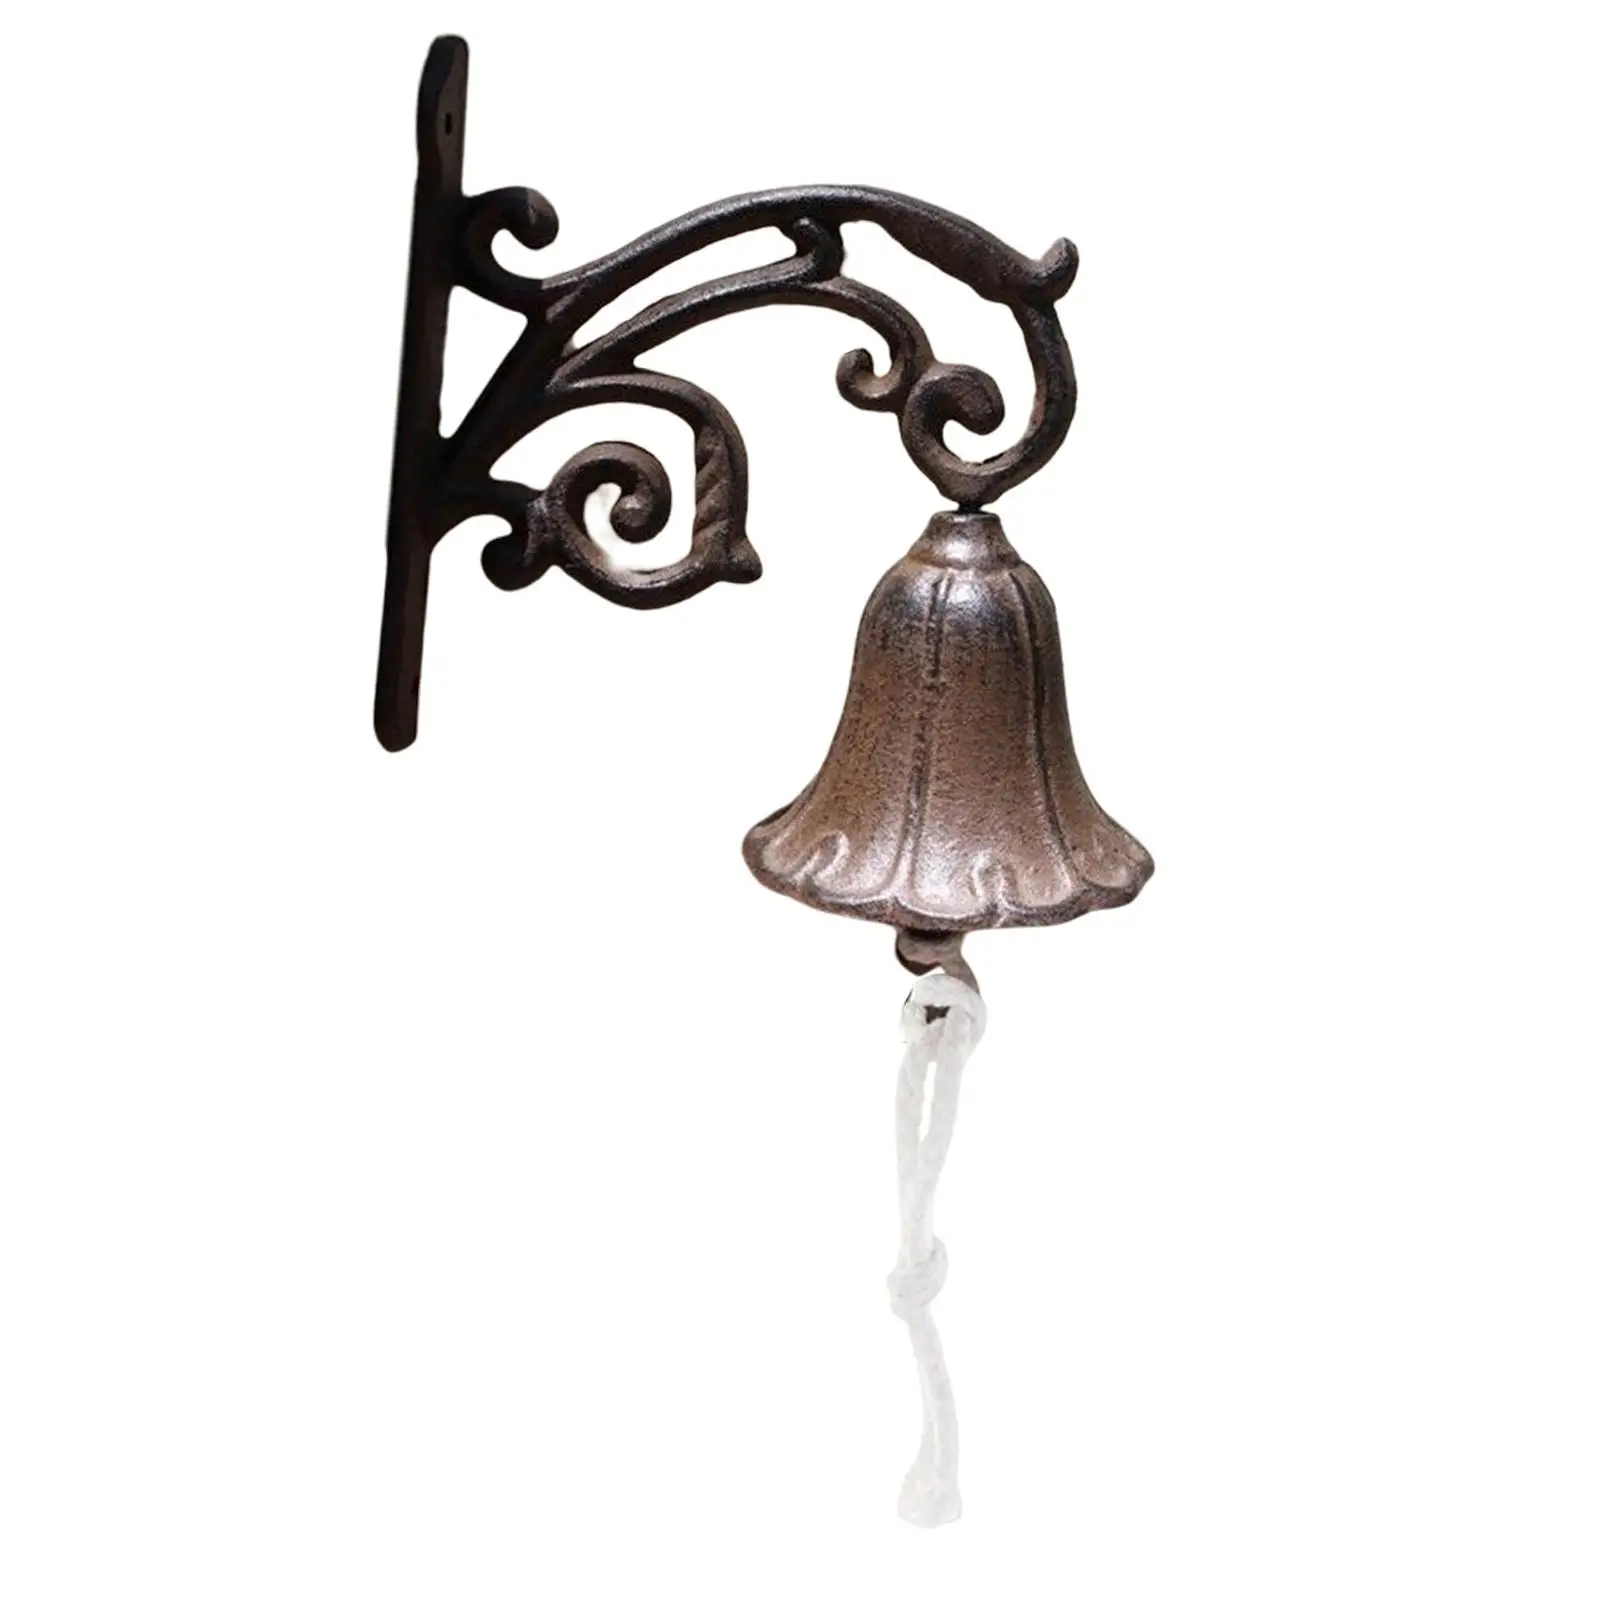 Rustic Cast Iron Hand Bell Iron Cast Art Decoration Welcome Sign Wall Mounted Manually Shaking Wall Bell for Outside Home Porch